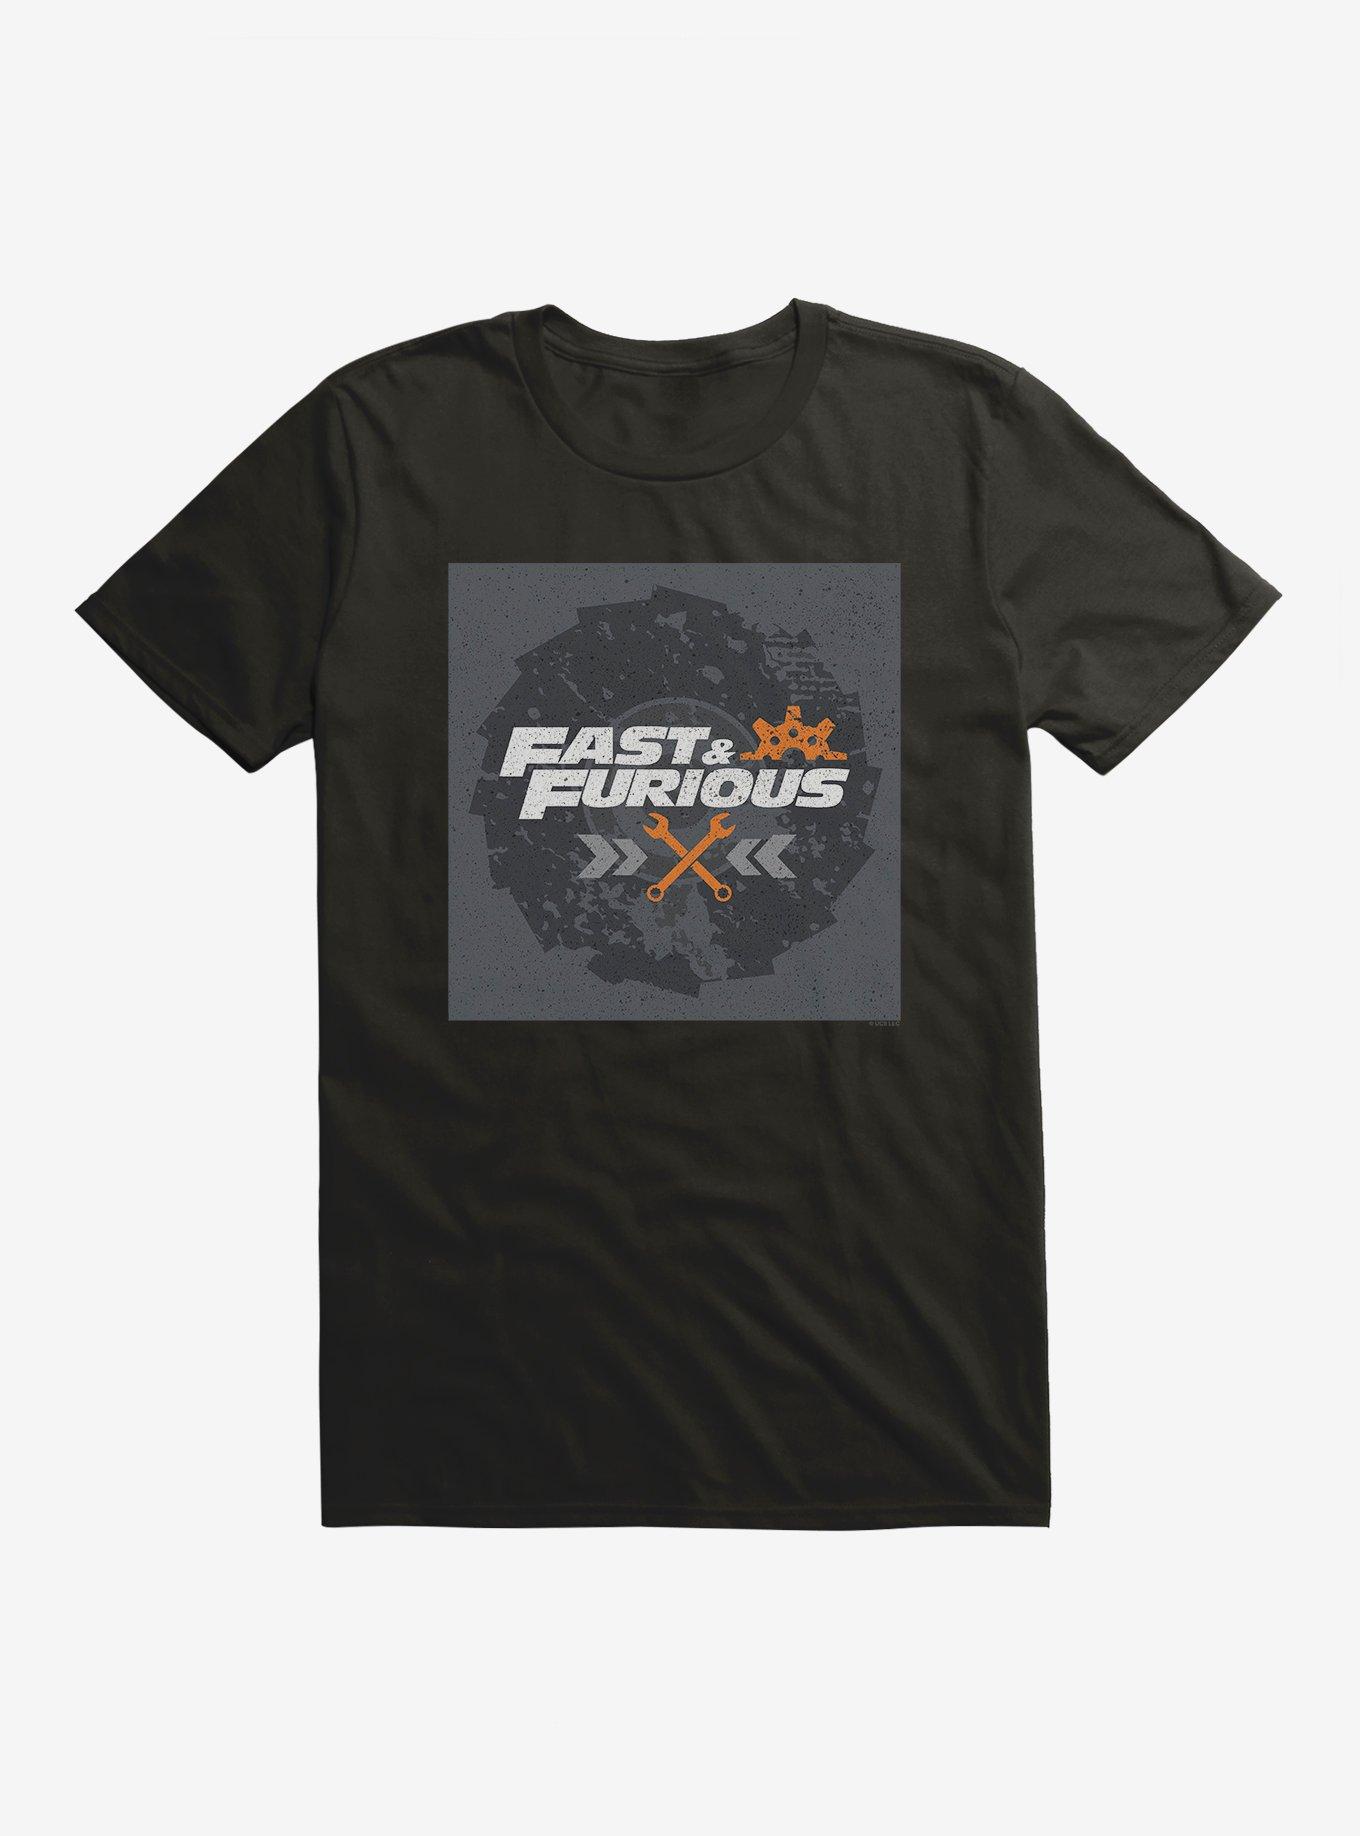 Fast & Furious Gear Wrench T-Shirt, BLACK, hi-res